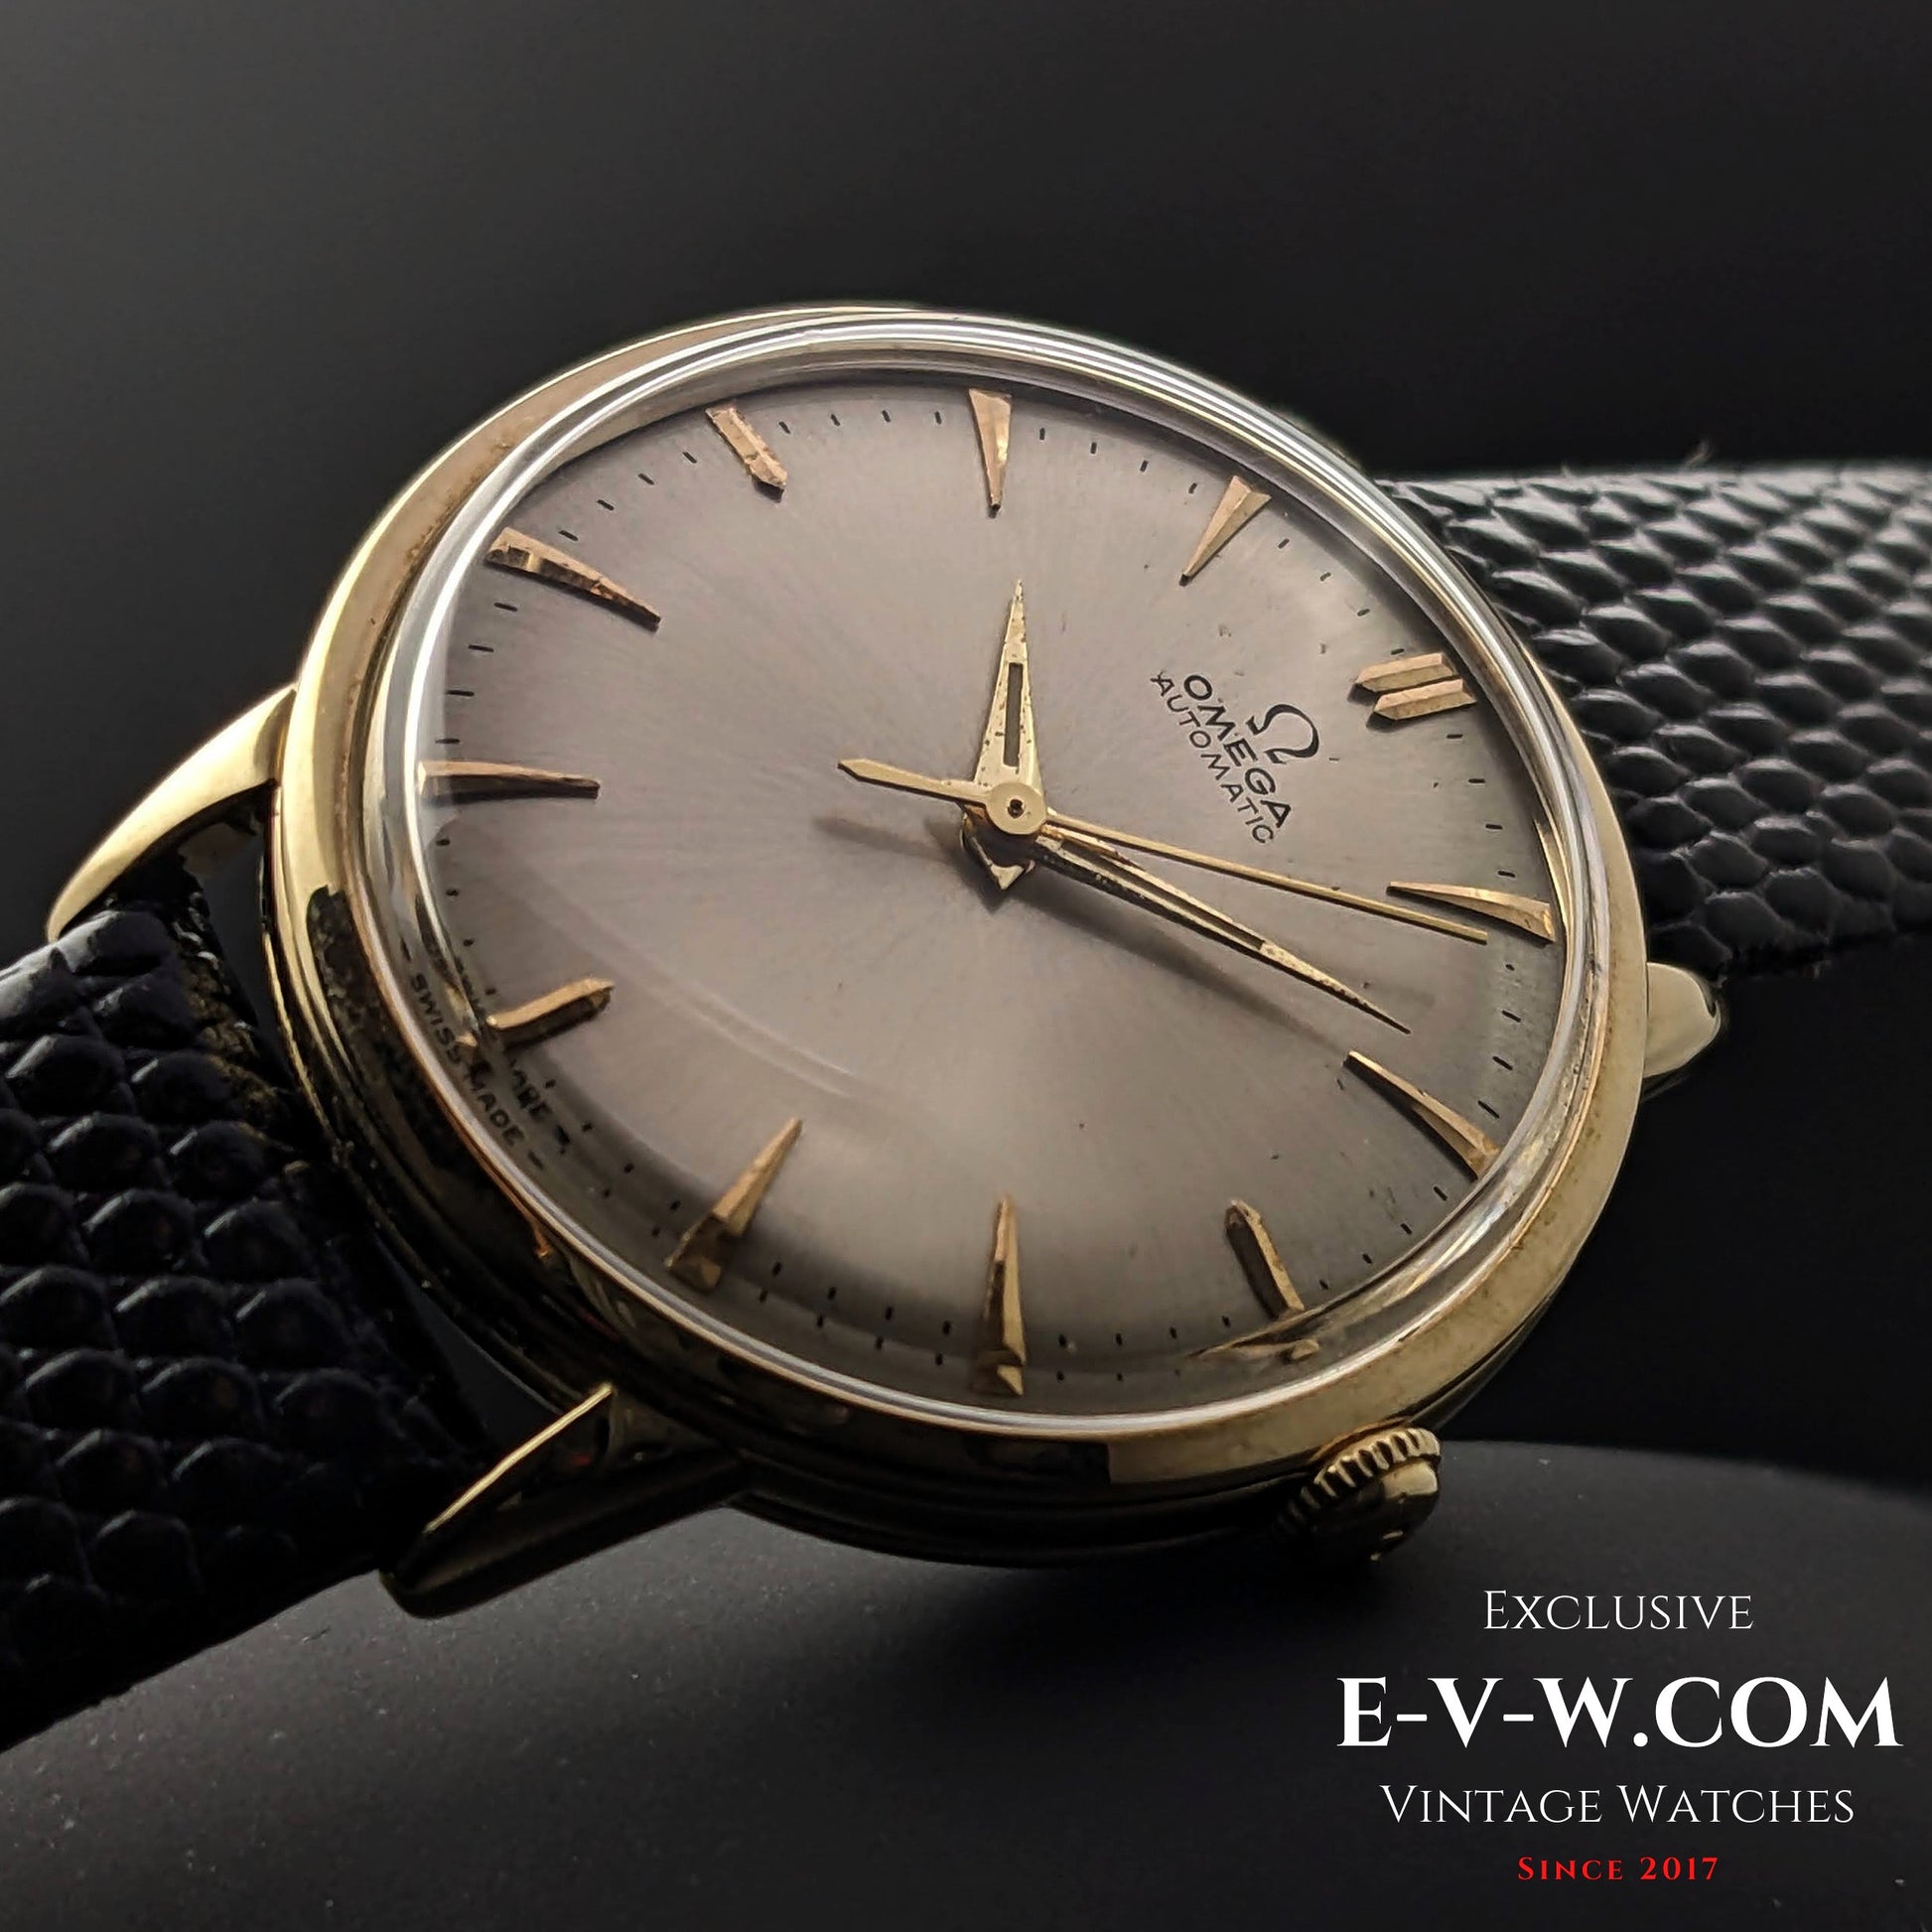 74 Years Old Vintage Omega Automatic Bumper / 14K solid Gold Ref. G6518 / Cal. 351 / Vintage 1950